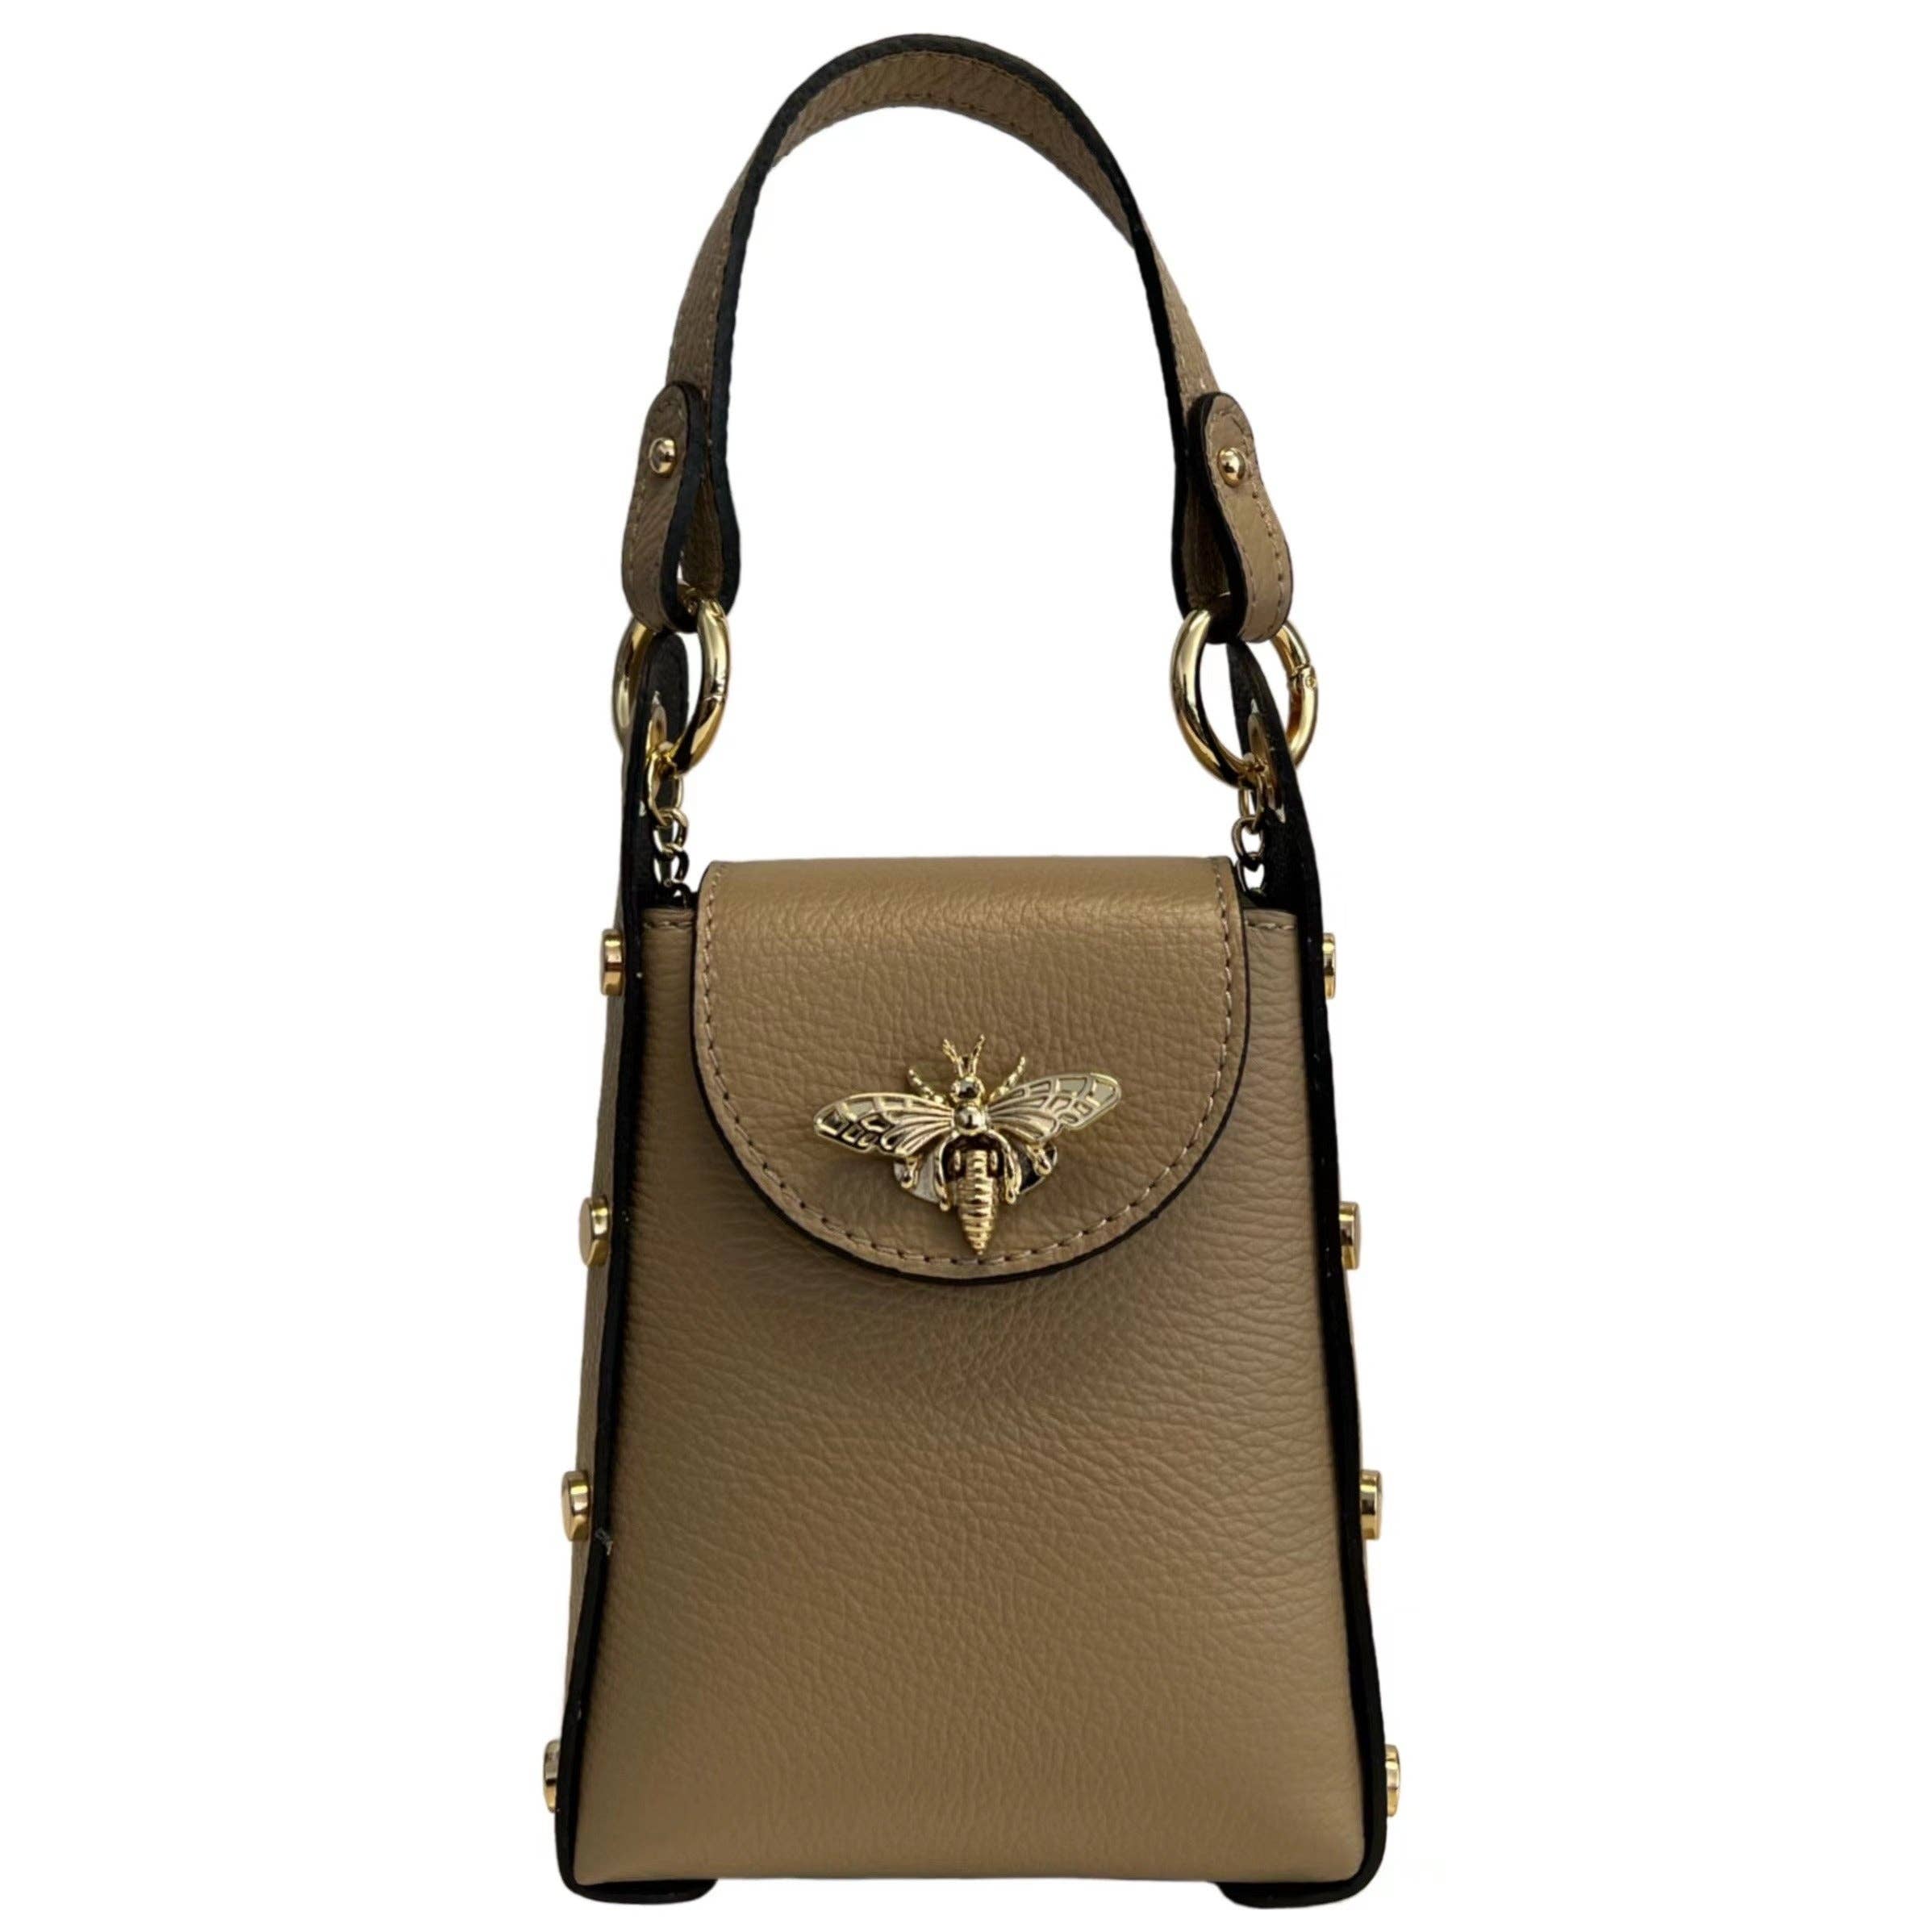 Modarno mini bag in genuine leather dollar with bee-shaped l - Coco and lulu boutique 